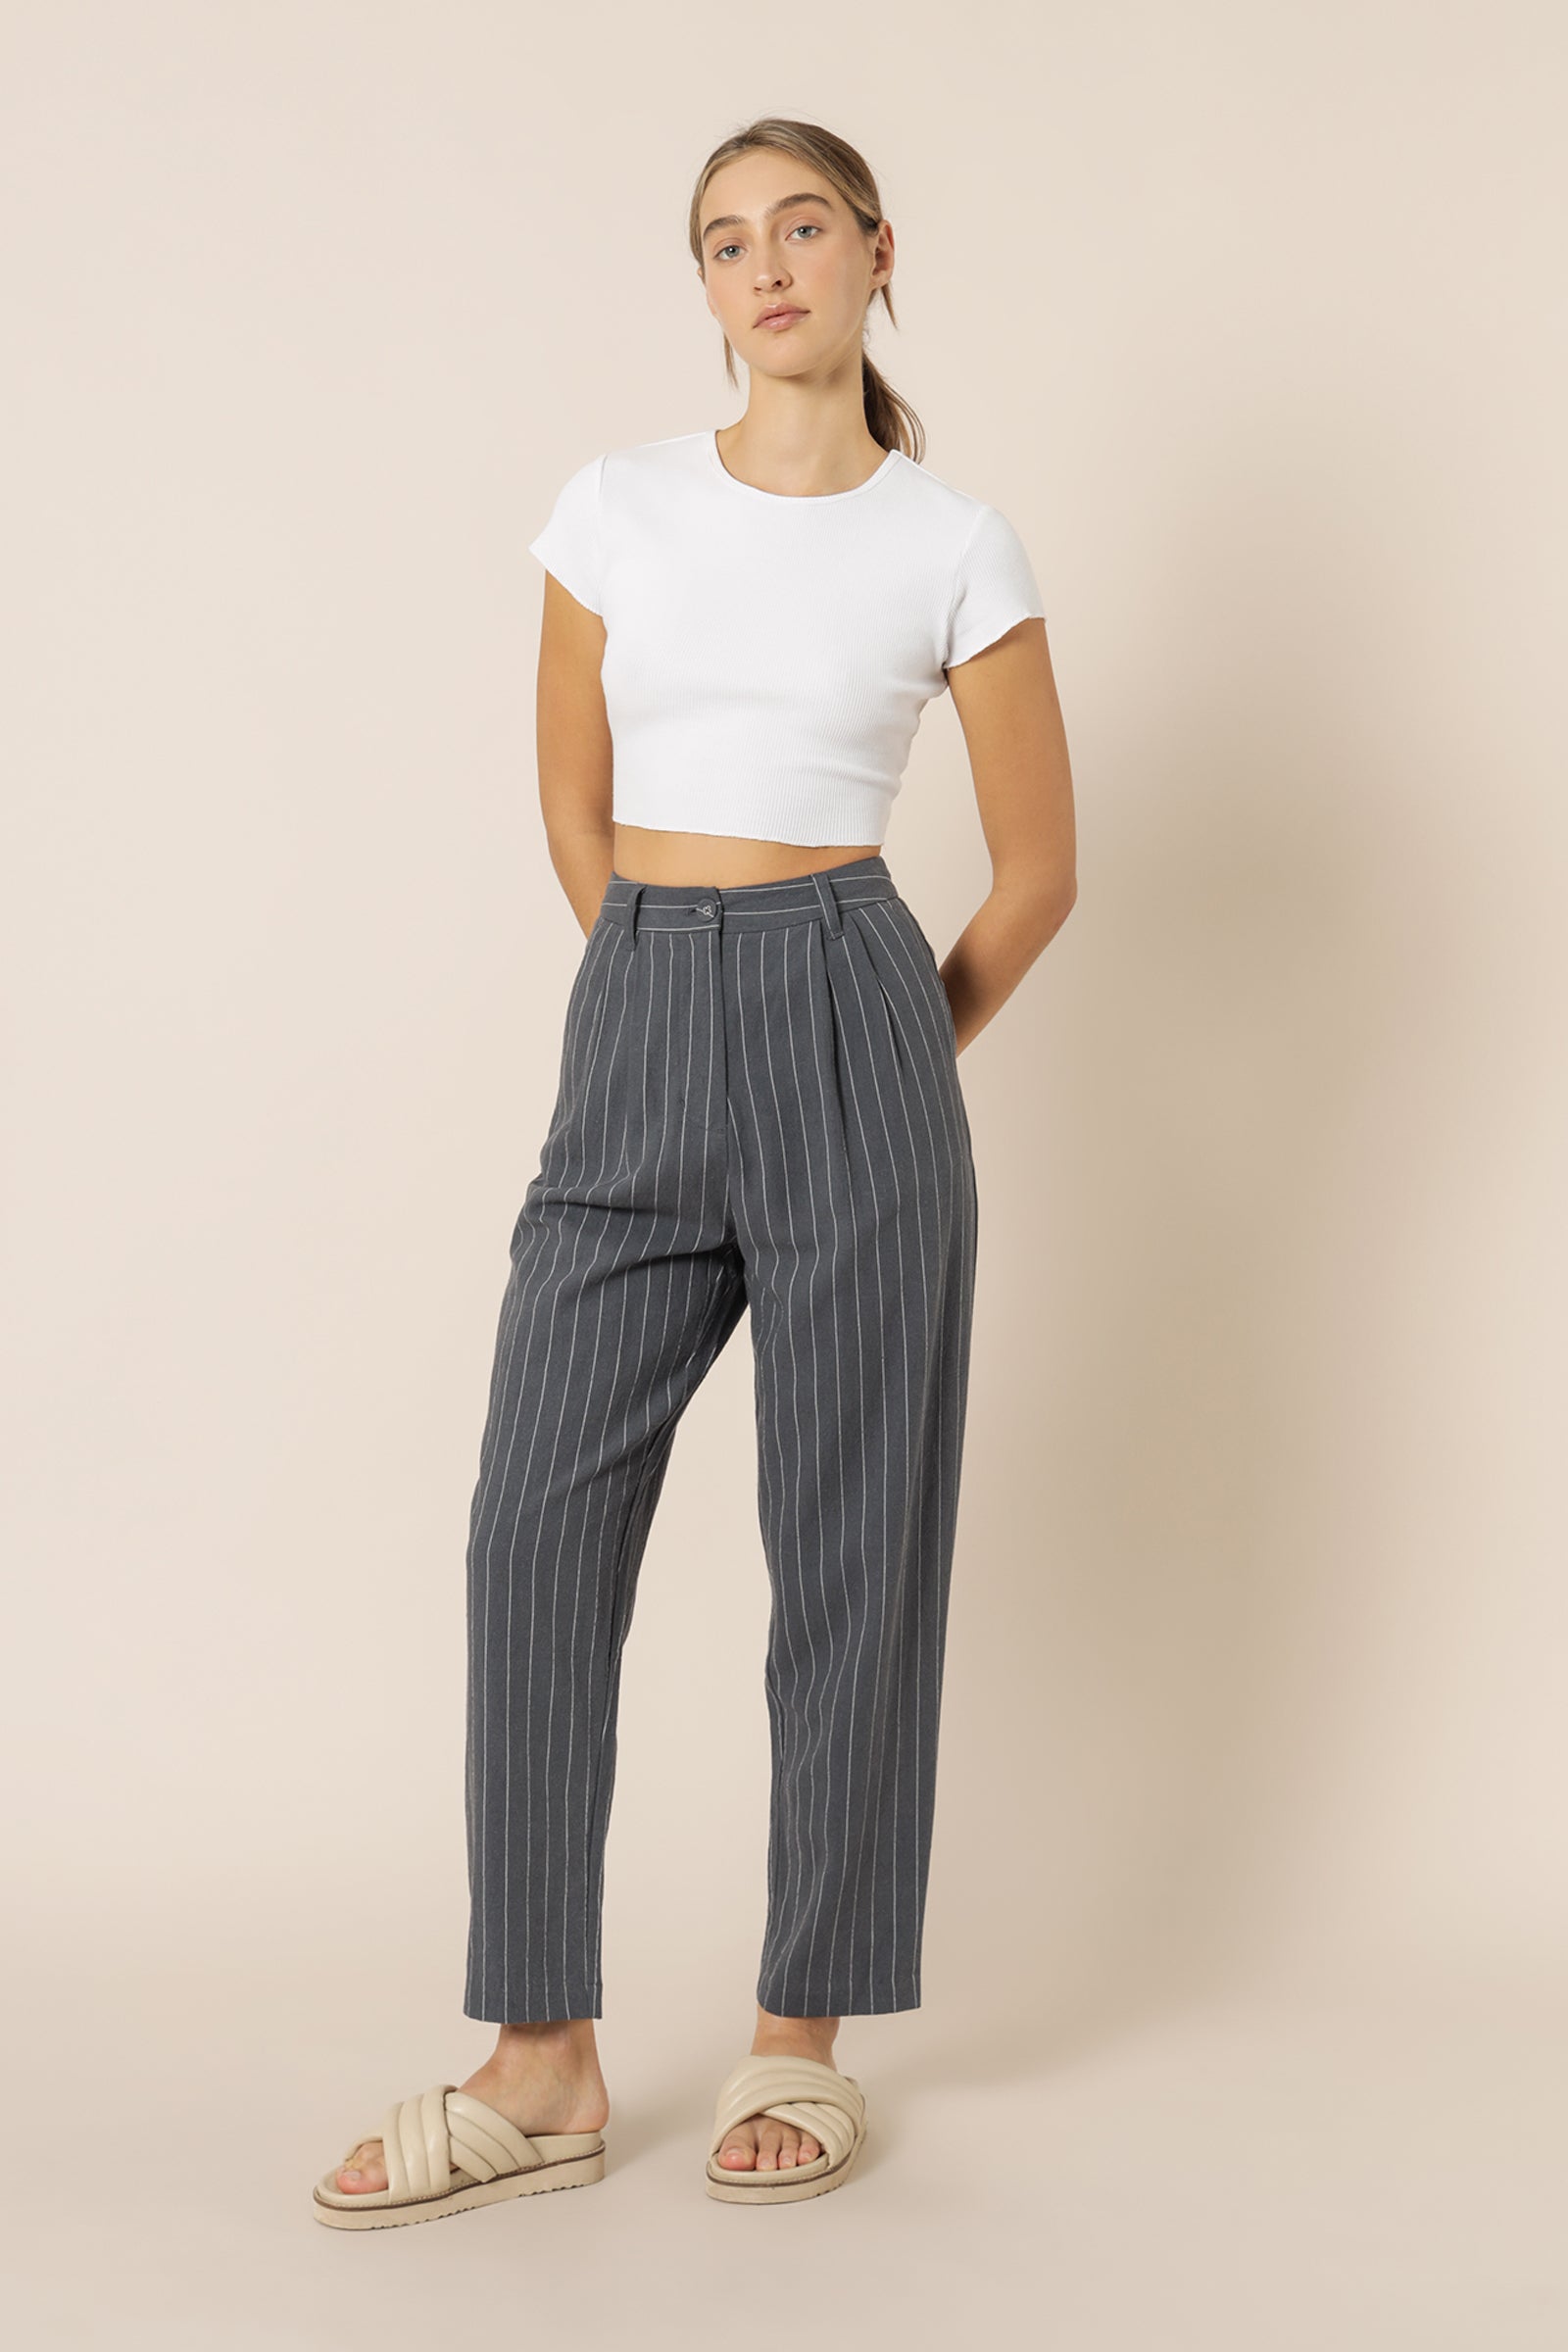 Nude Lucy Finley Pinstripe Tailored Pant Navy Pinstripe Pants 